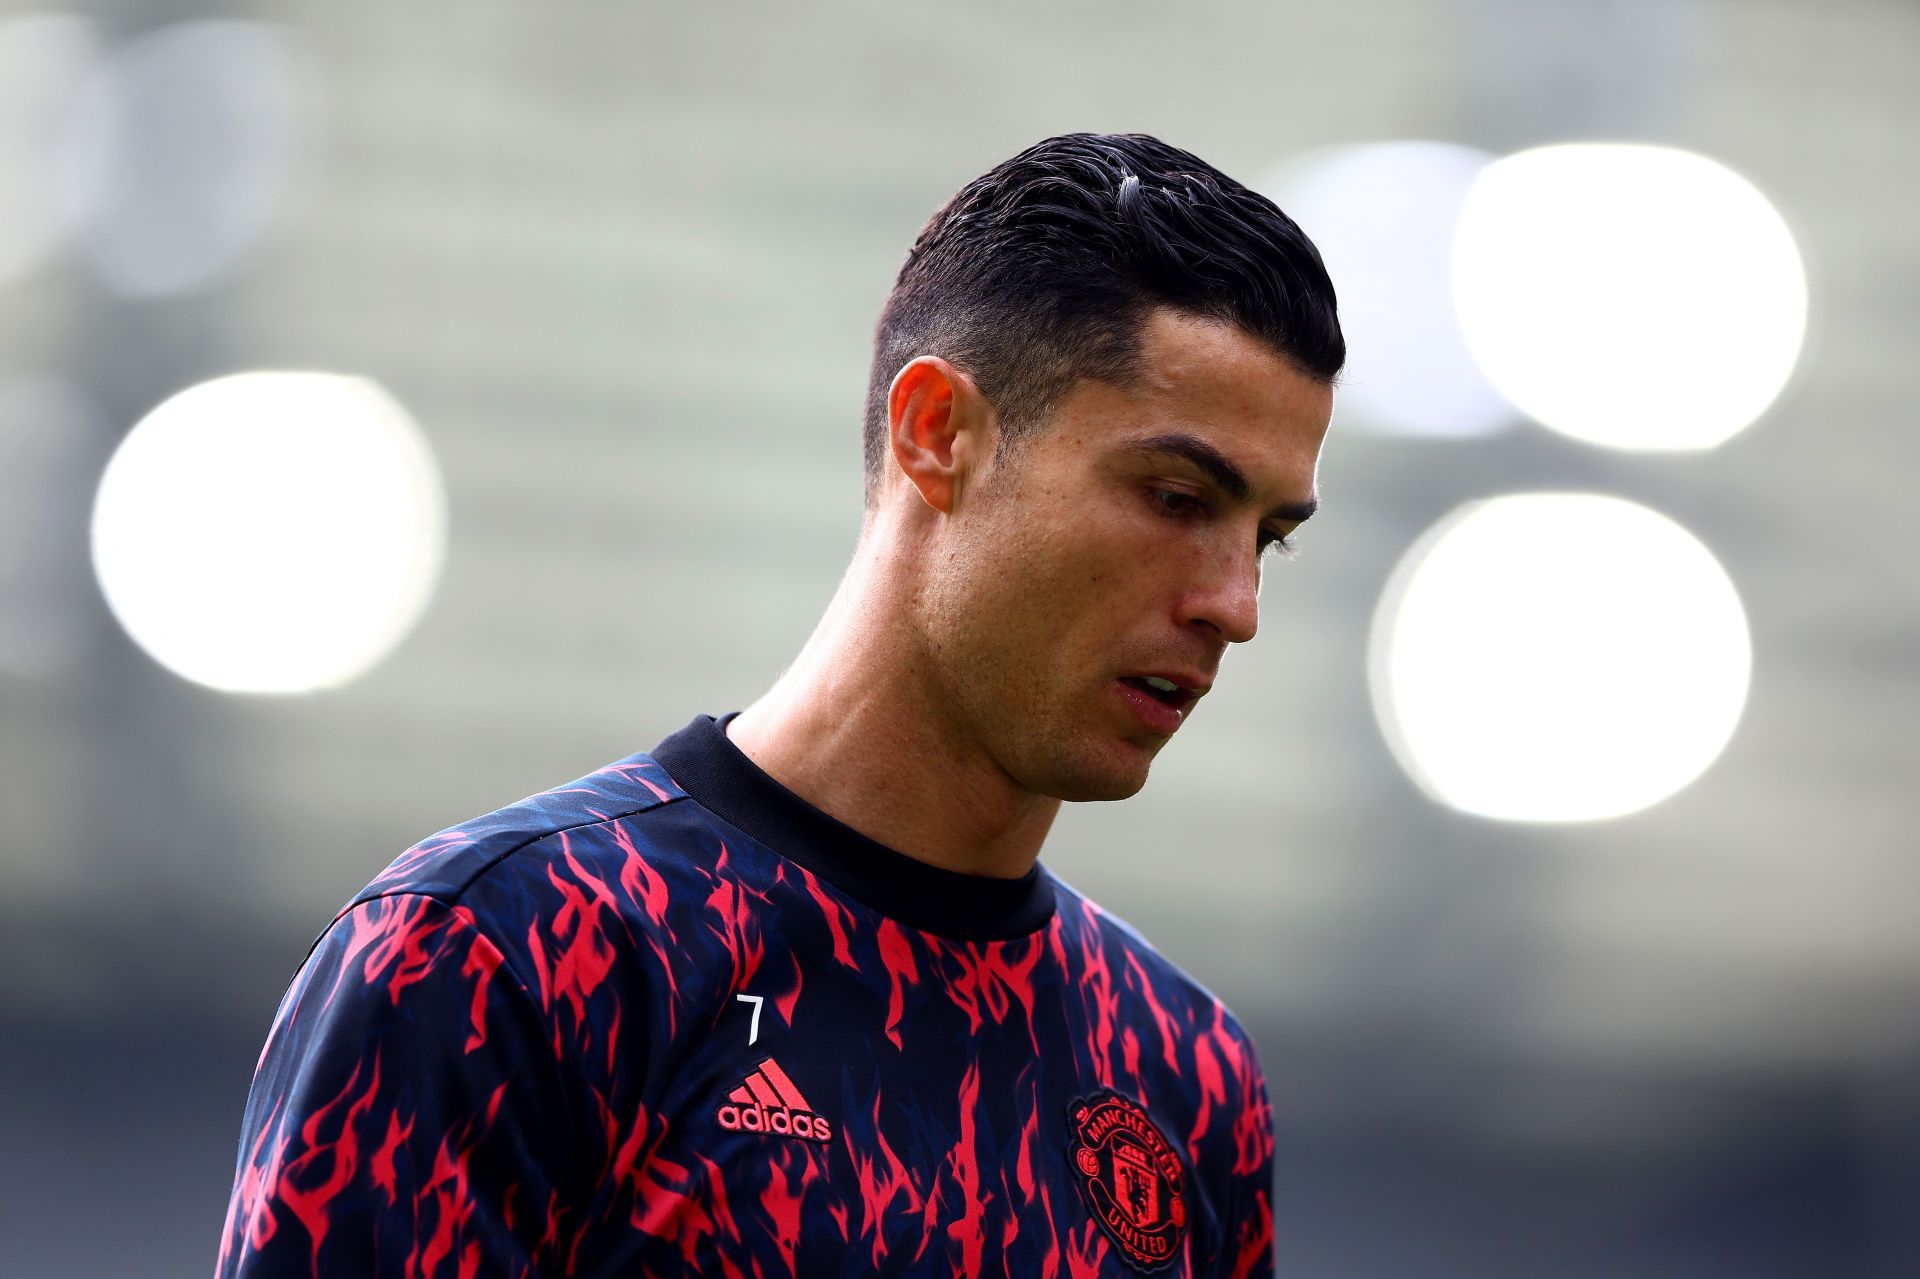 There have been no bids for Cristiano Ronaldo